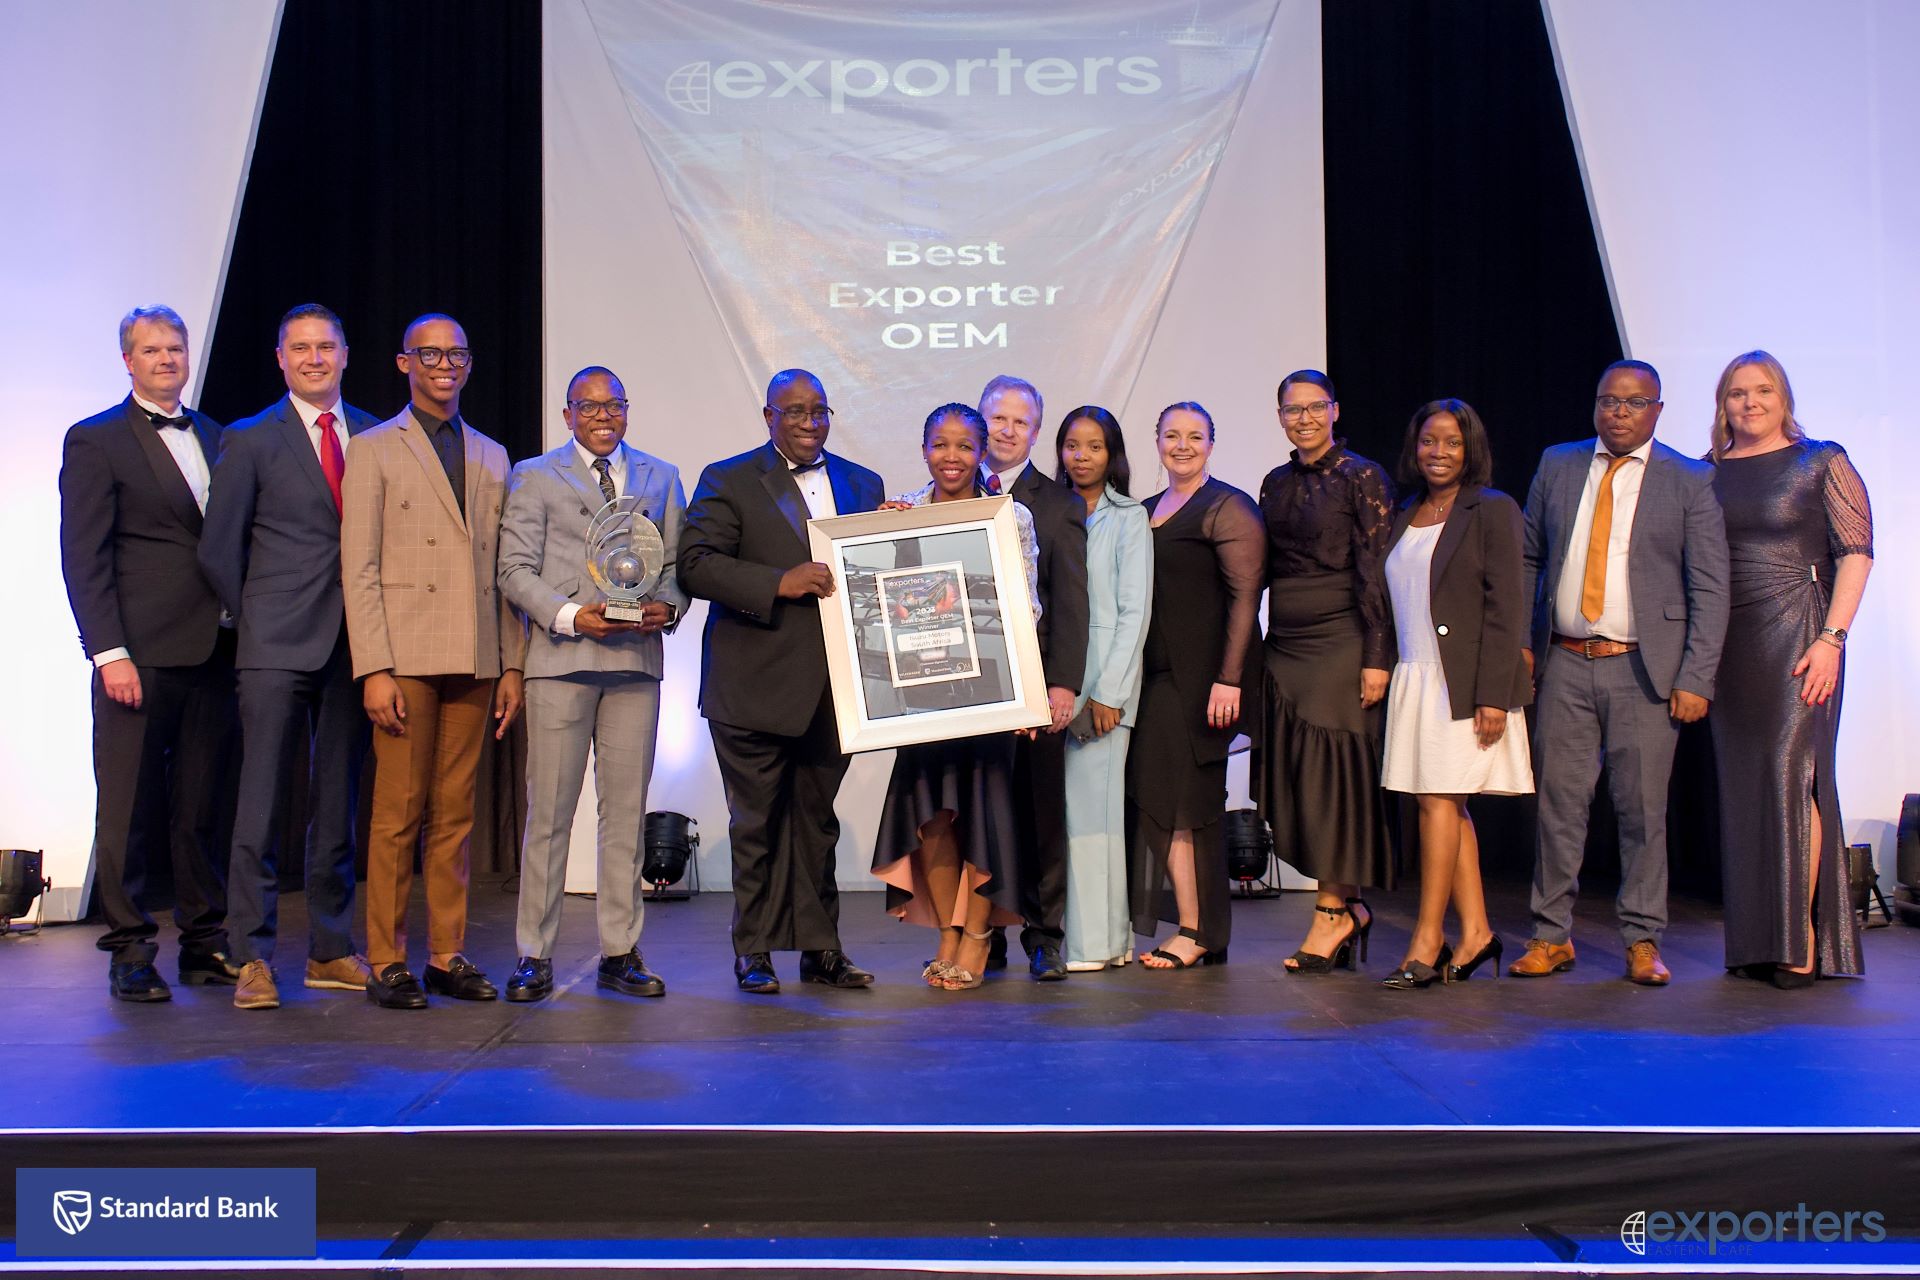 ISUZU Motors South Africa wins the Eastern Cape Best Exporter Award in the OEM category